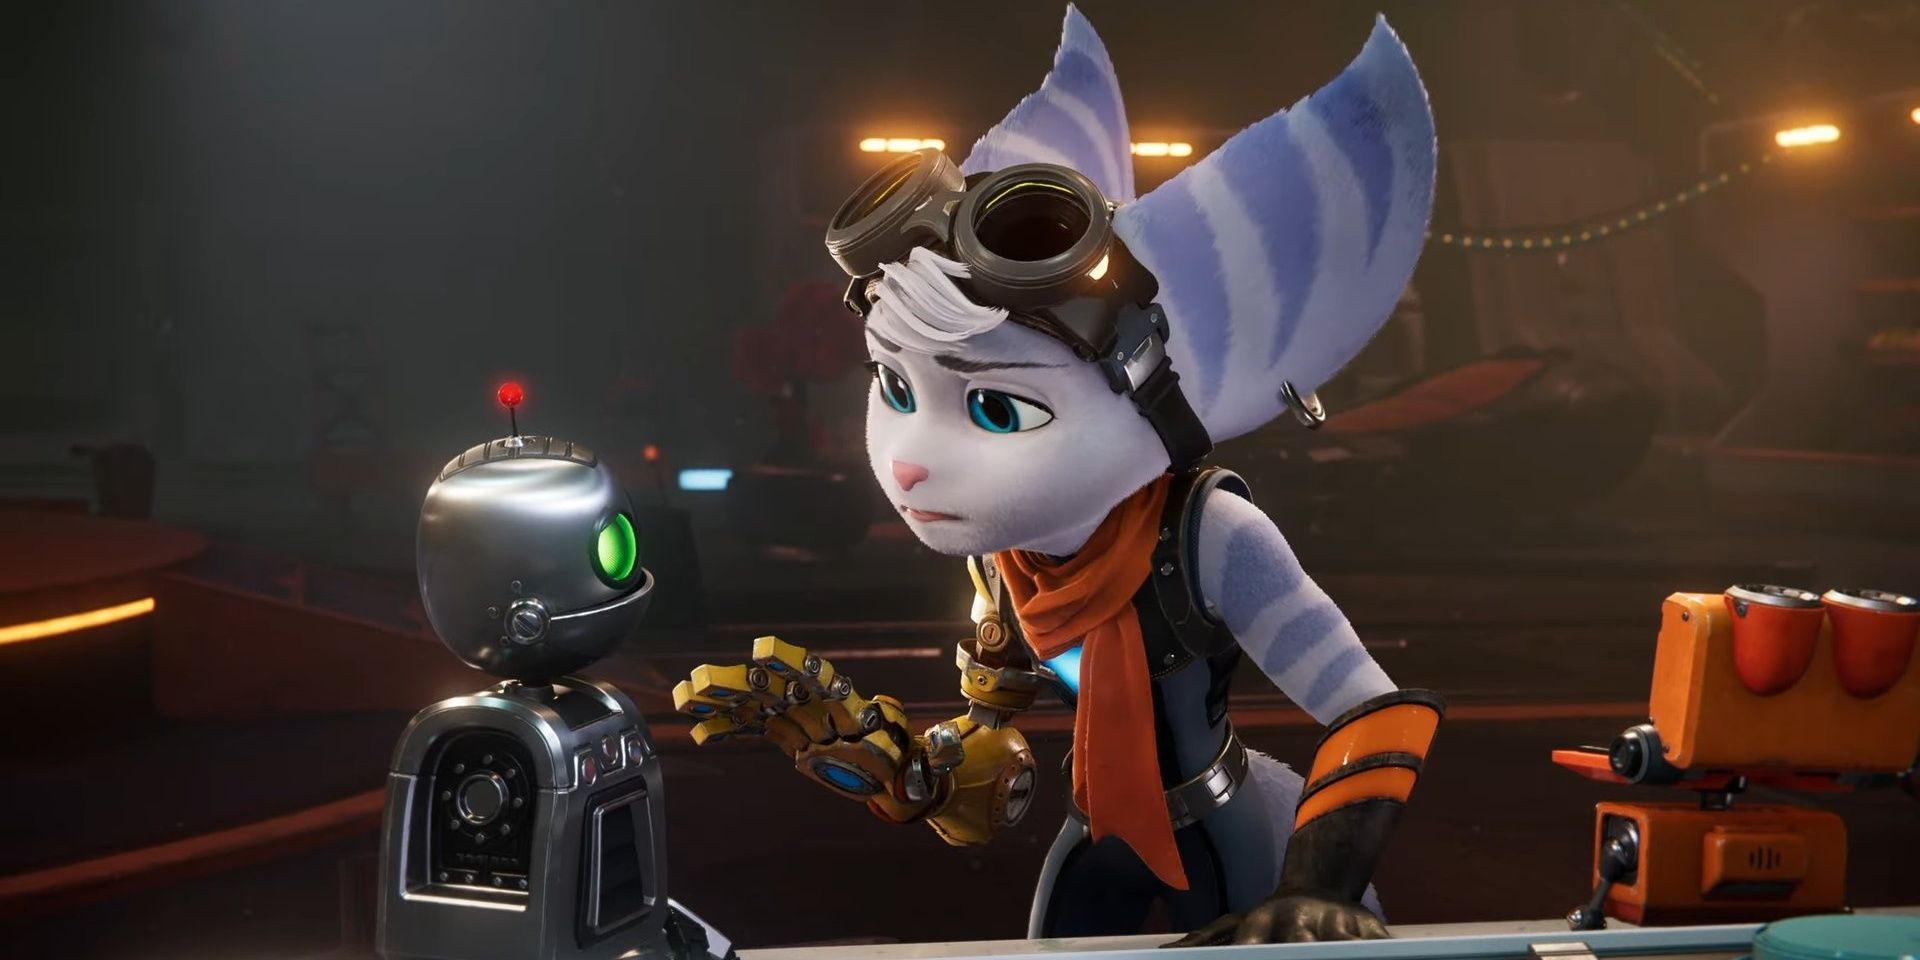 Clank and Rivet in Ratchet & Clank: Rift Apart